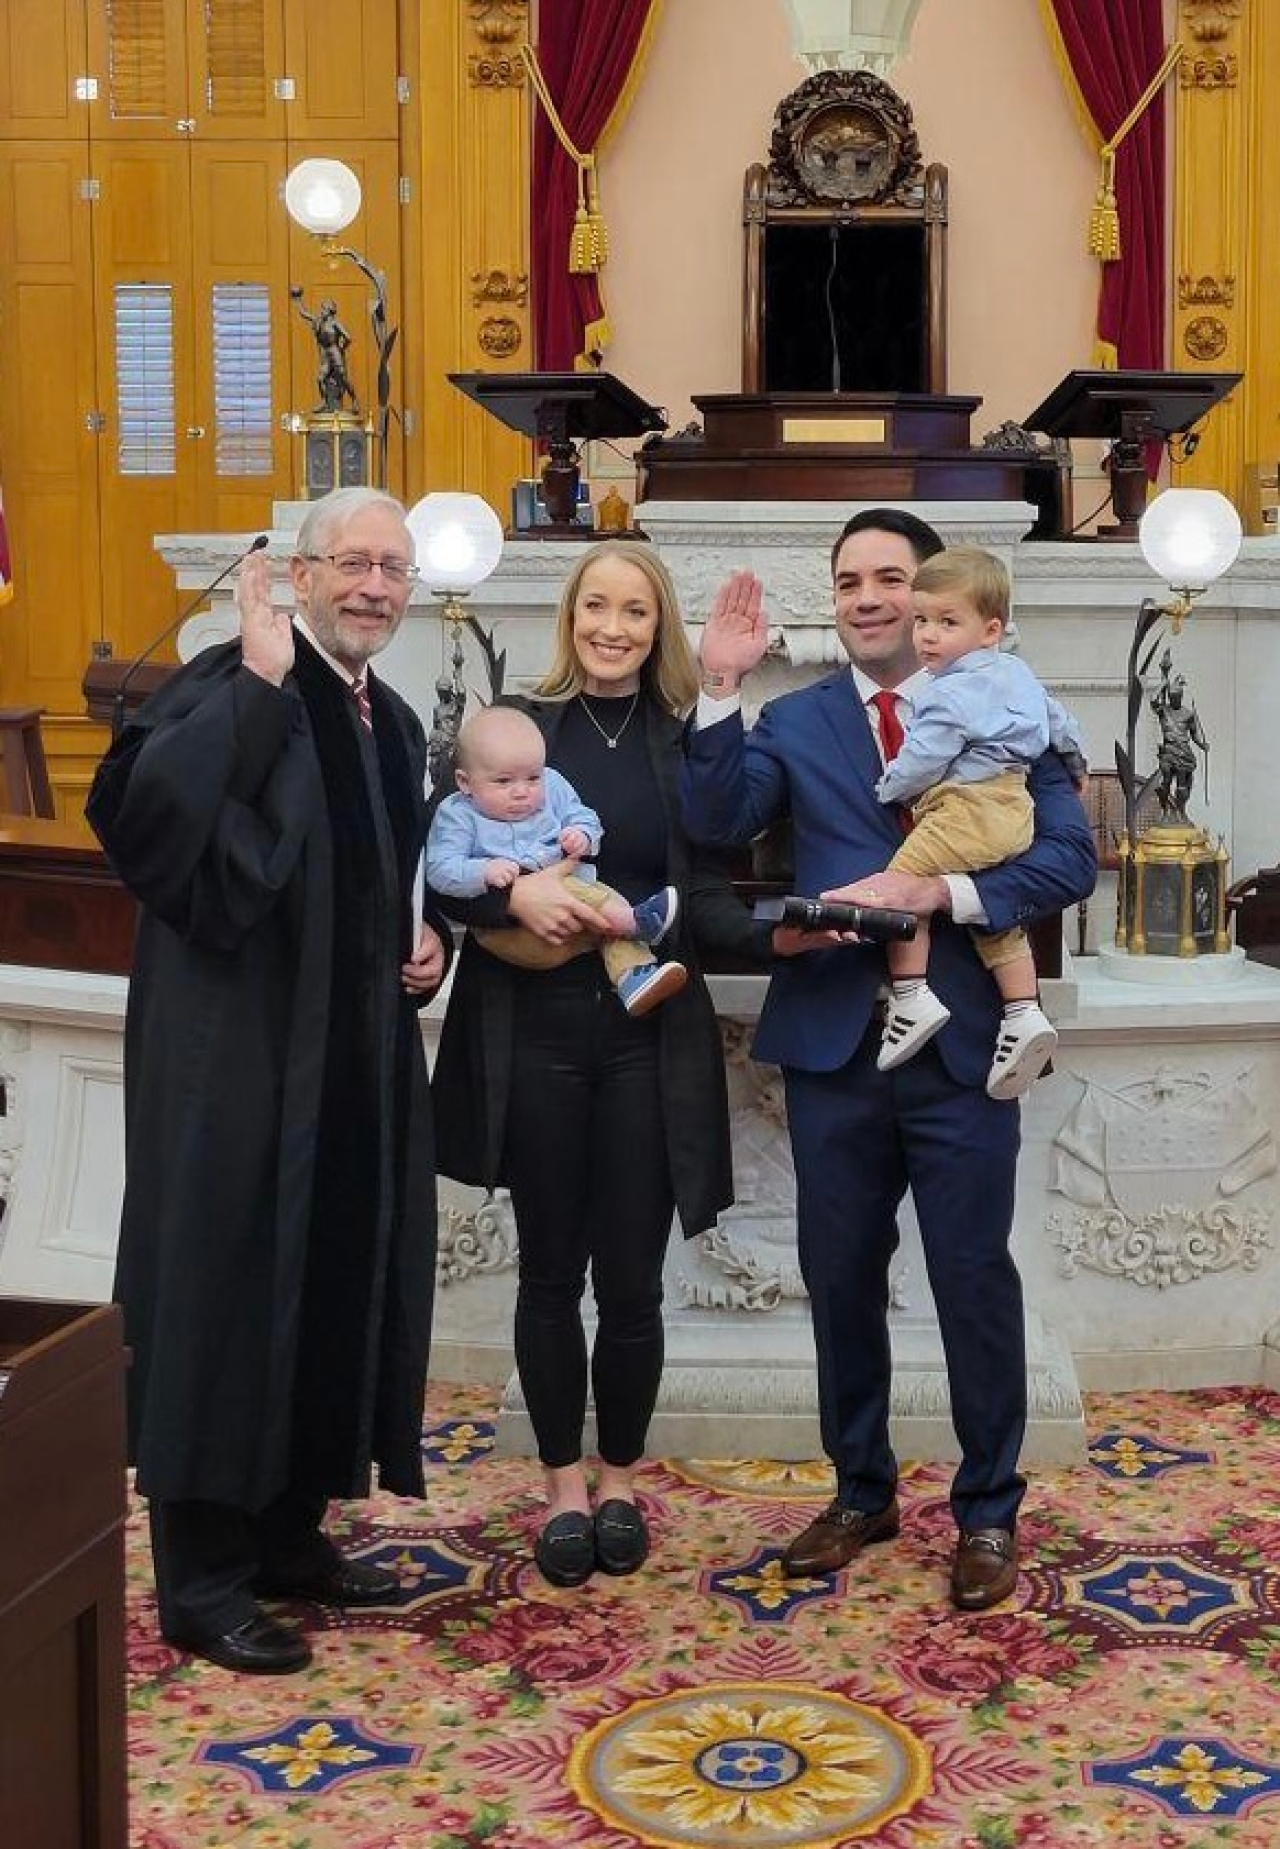 State Representative Demetriou poses for a photo with his family after being sworn in to serve the 35th House District.